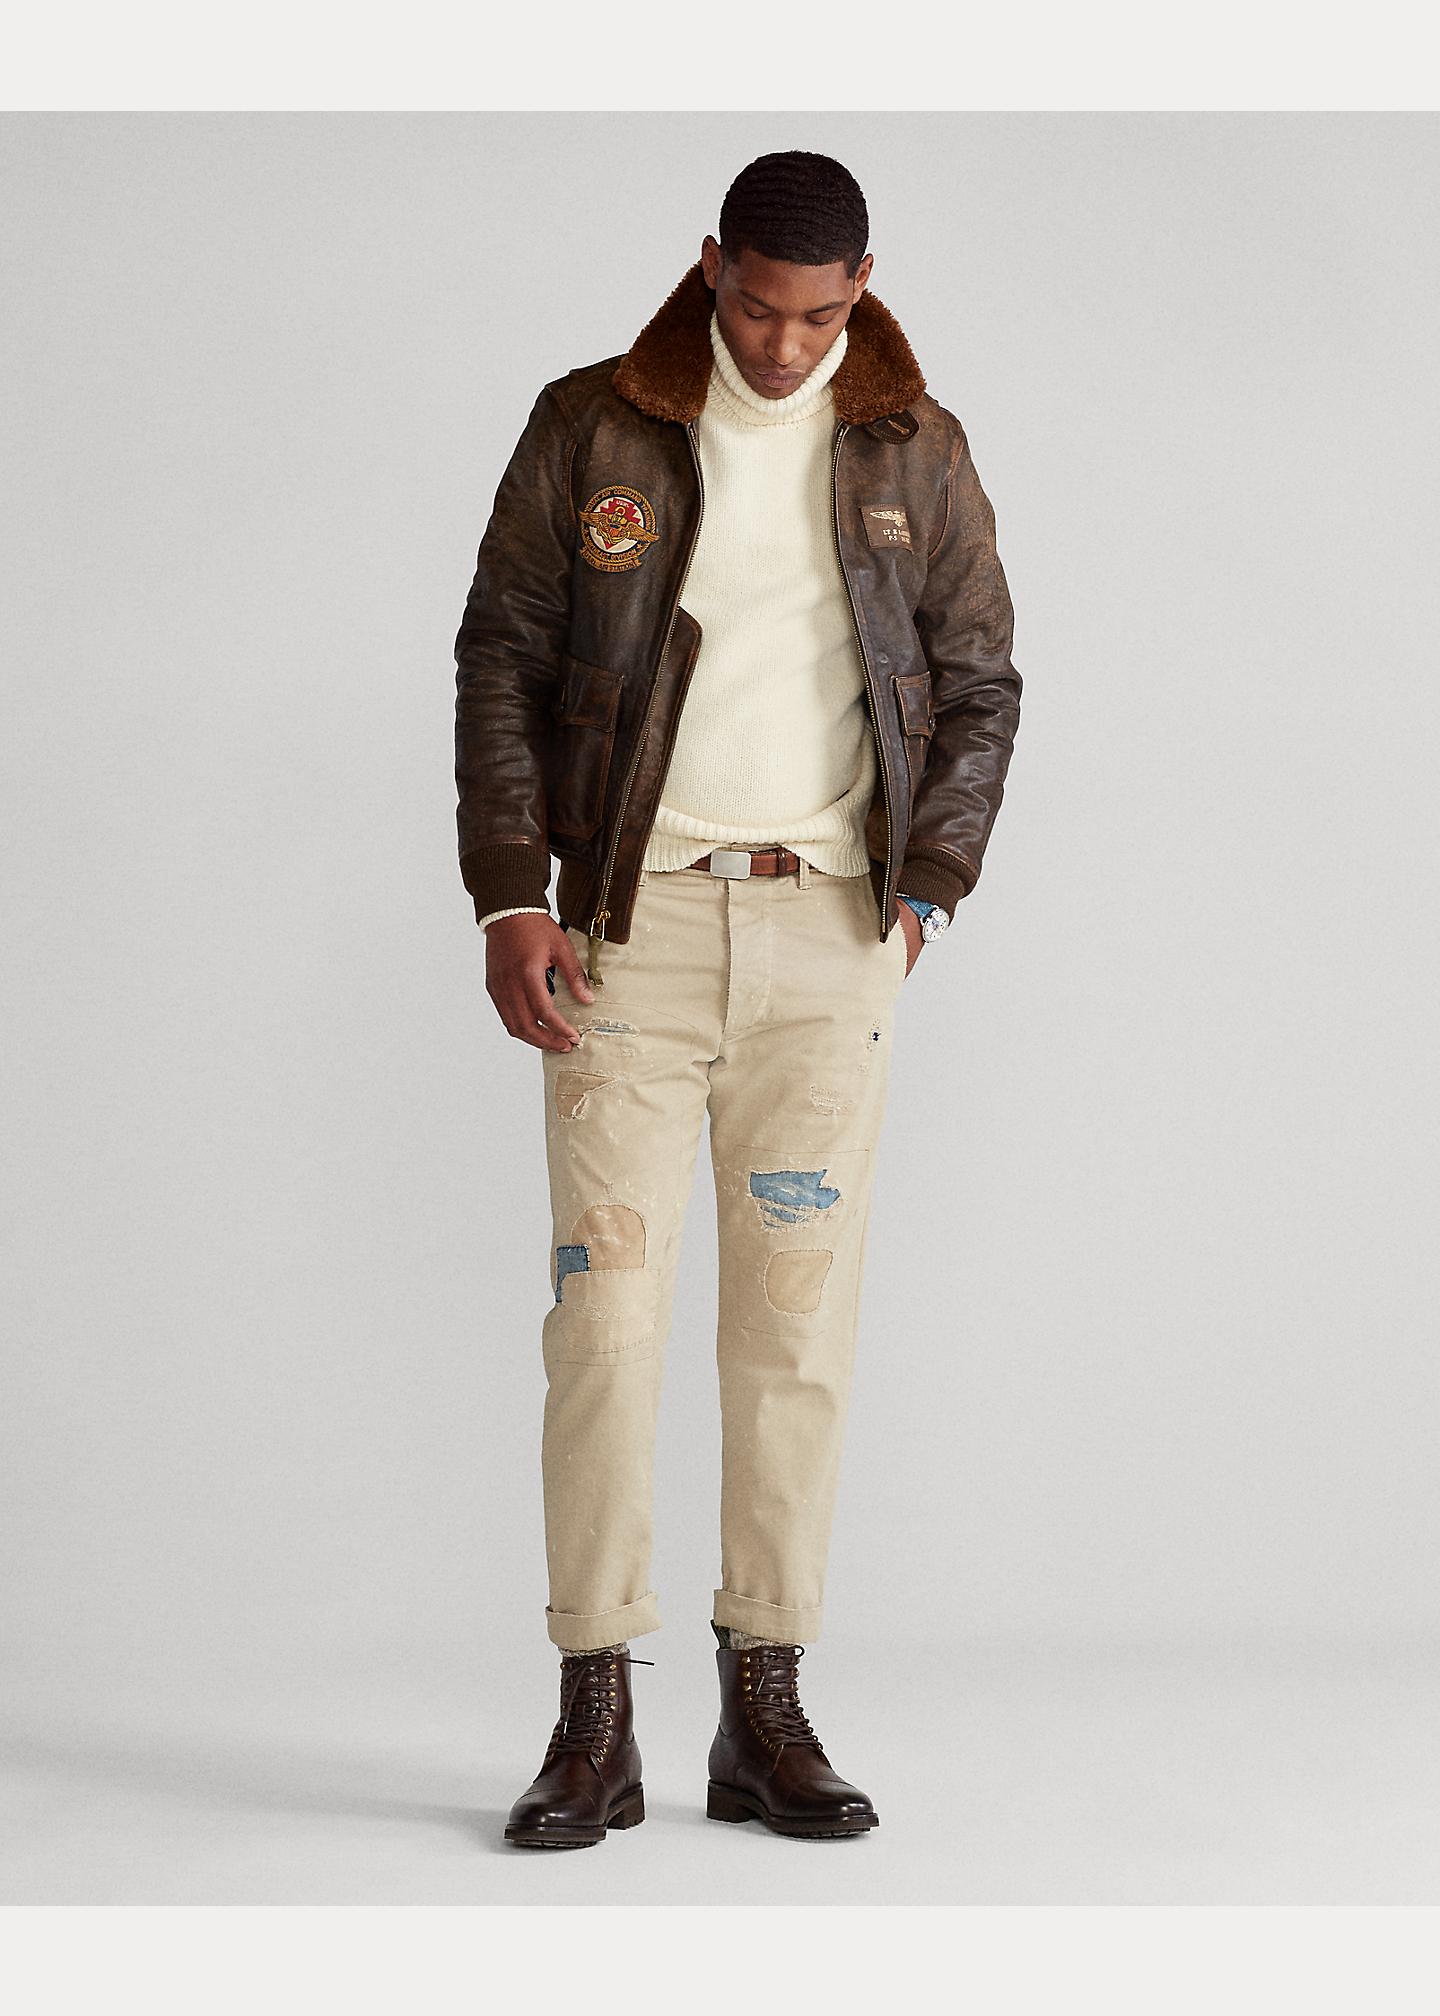 Polo Ralph Lauren Leather The Iconic Bomber Jacket in Brown for Men - Lyst